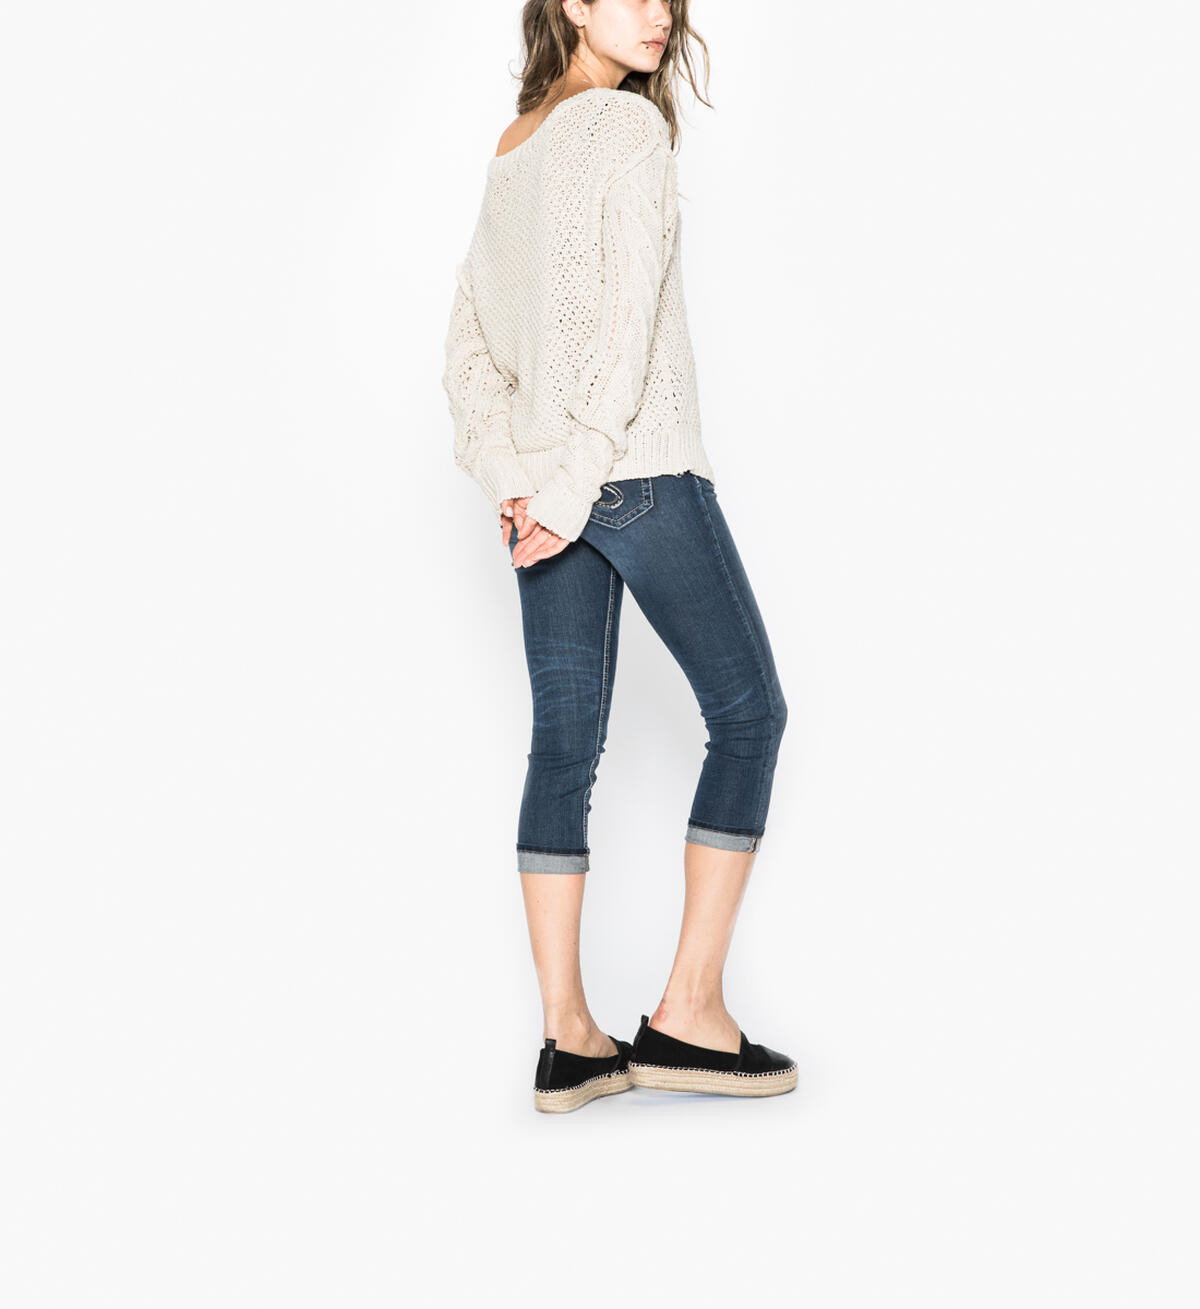 Skylar - Long-Sleeve Cable Knit Sweater, , hi-res image number 2